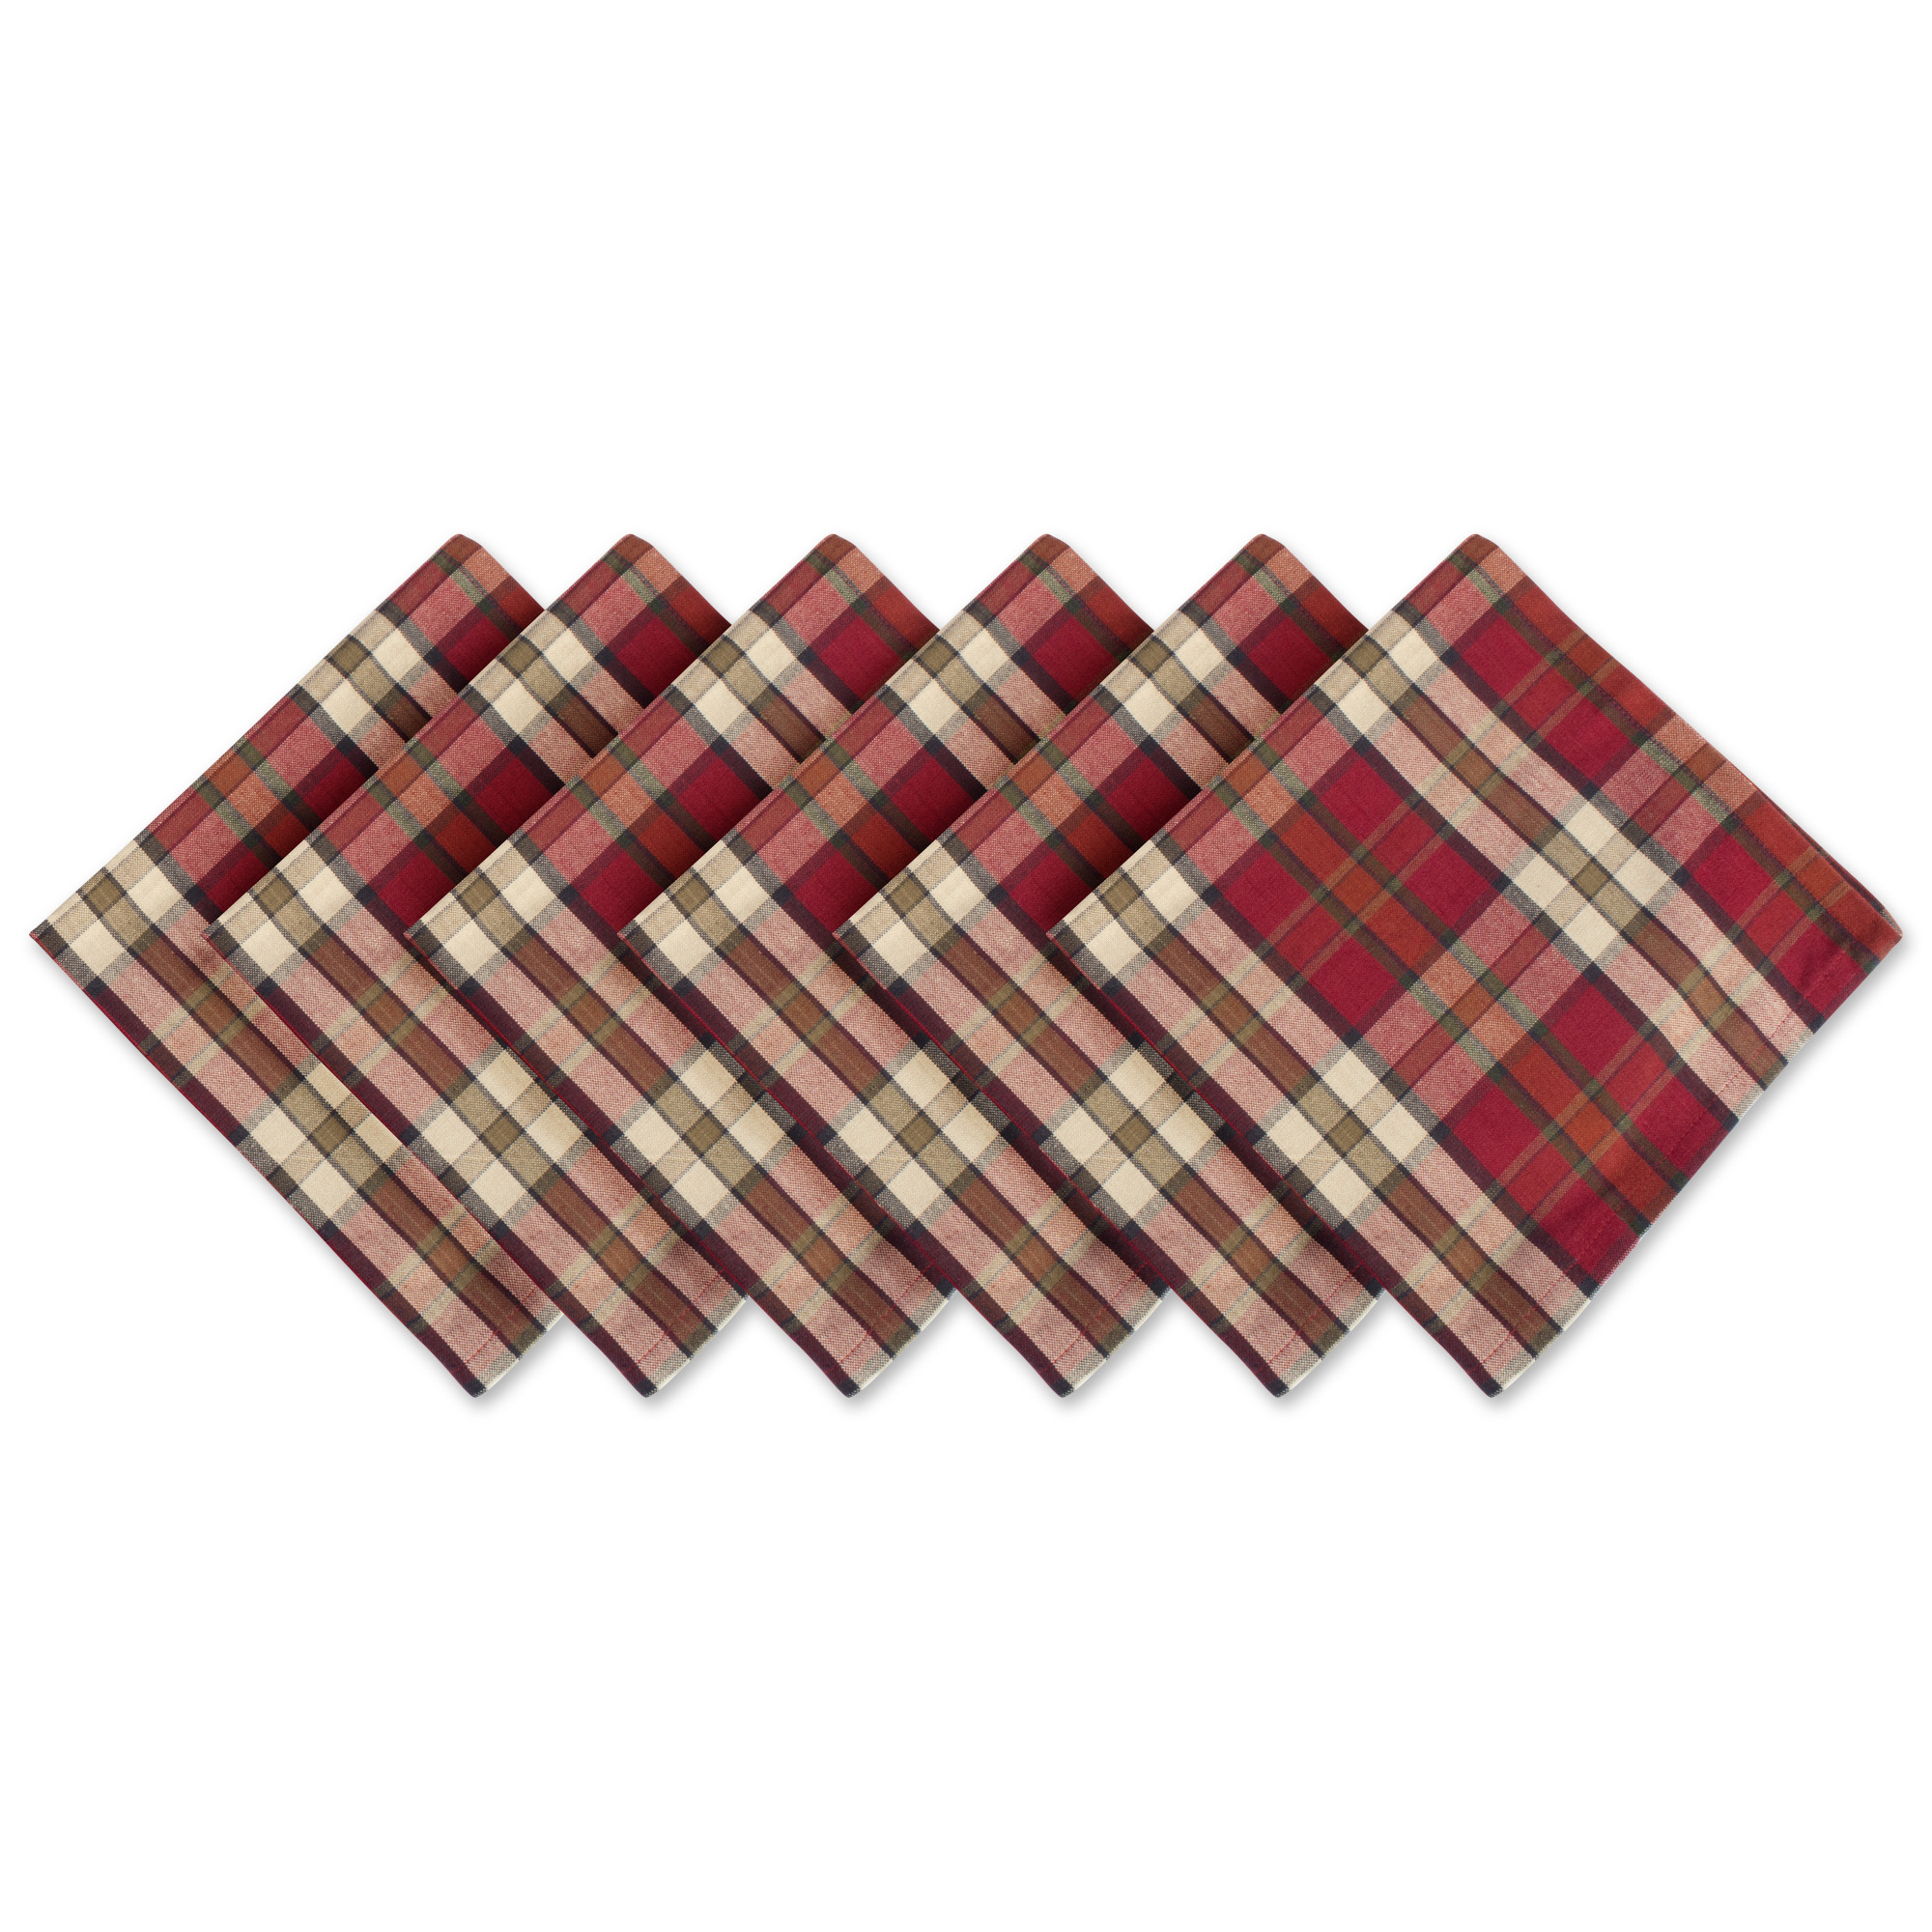 CC Home Furnishings Set of 6 Red and Black Plaid Patterned Square Napkins 20”